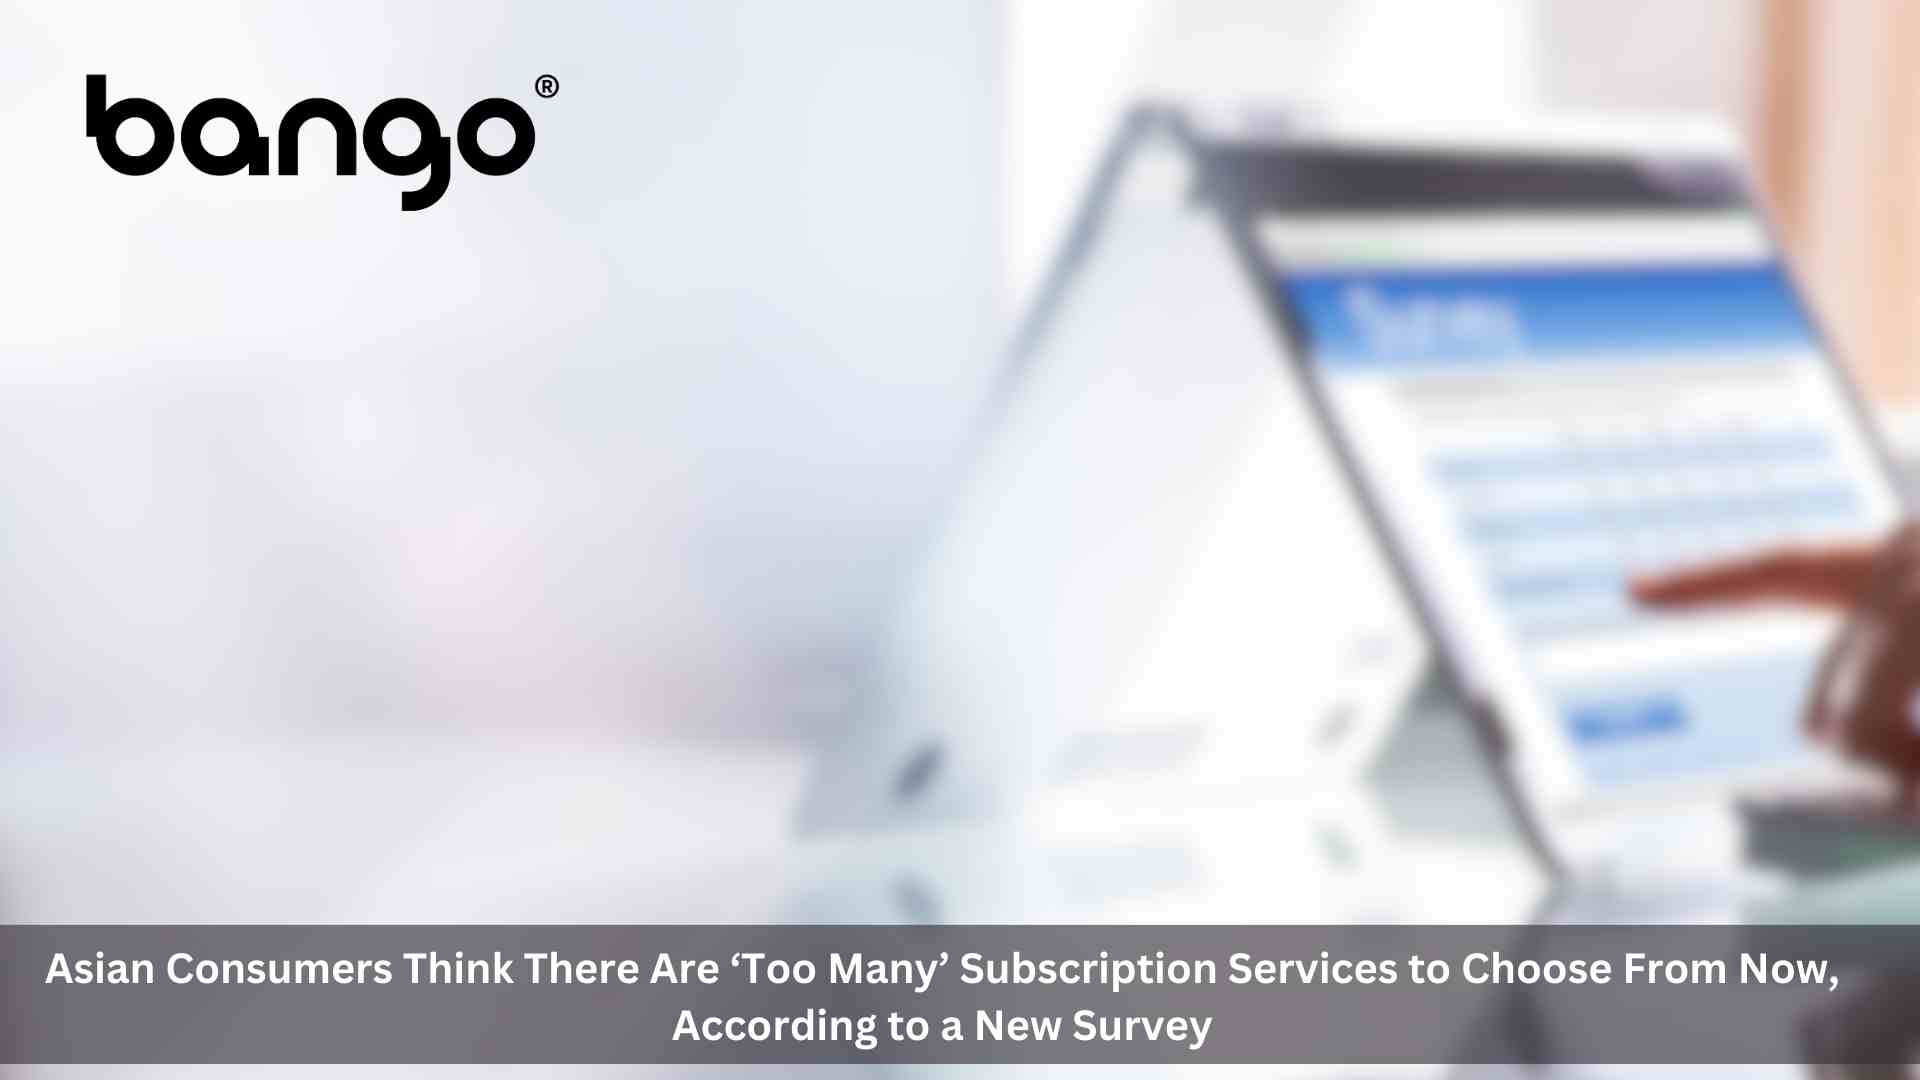 Overloaded: 81% of Asian consumers think there are ‘too many’ subscription services to choose from now